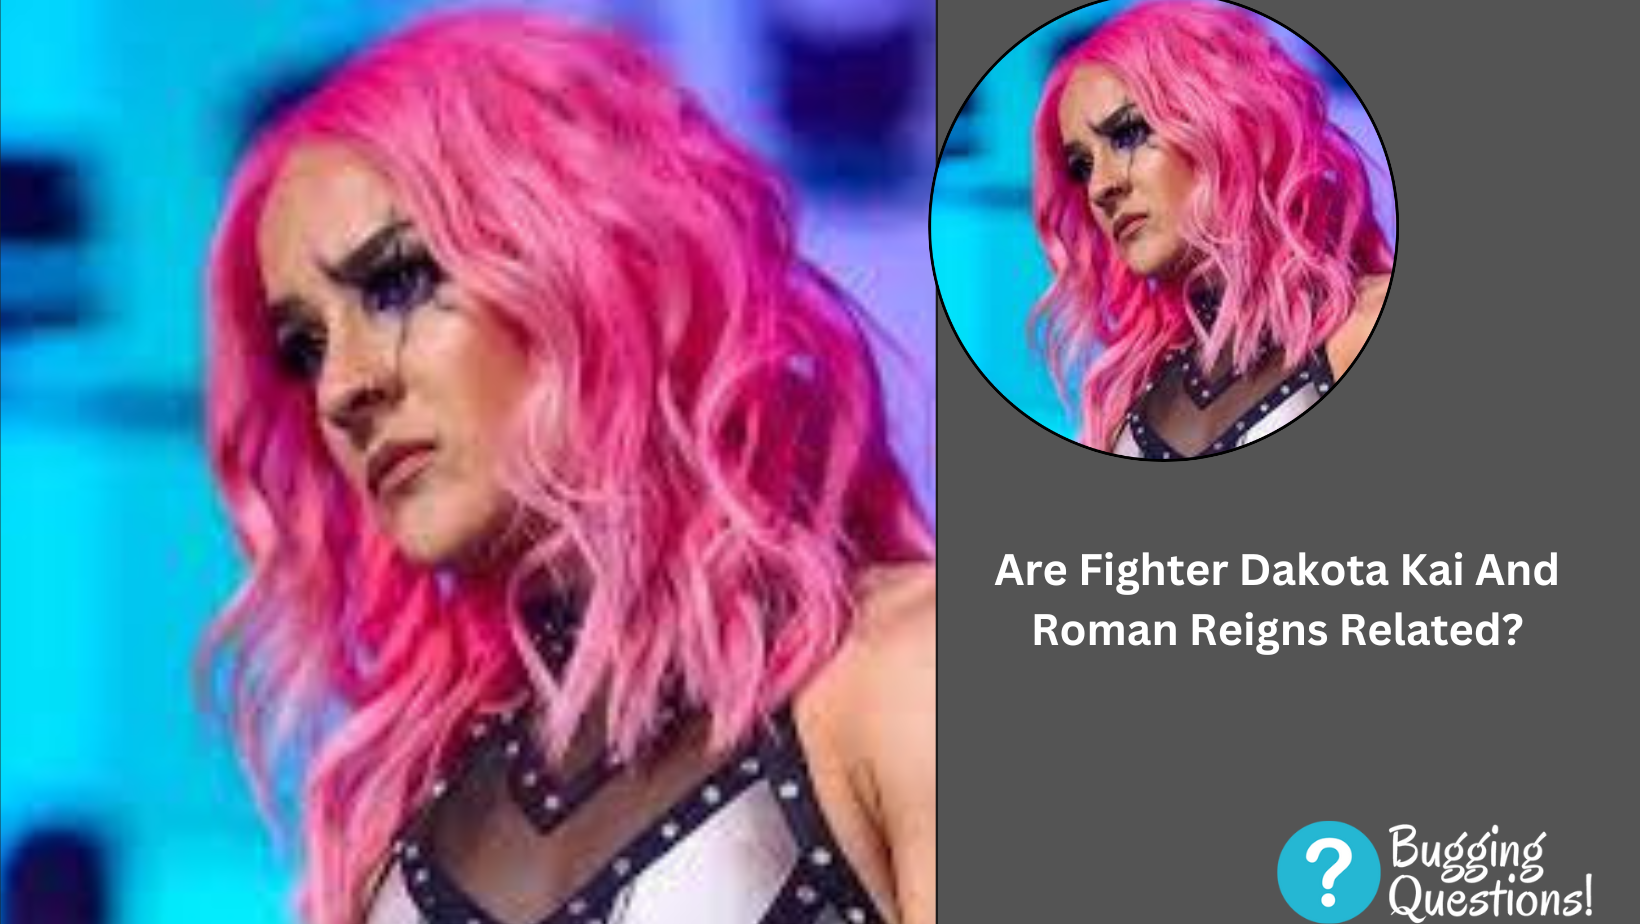 Are Fighter Dakota Kai And Roman Reigns Related?